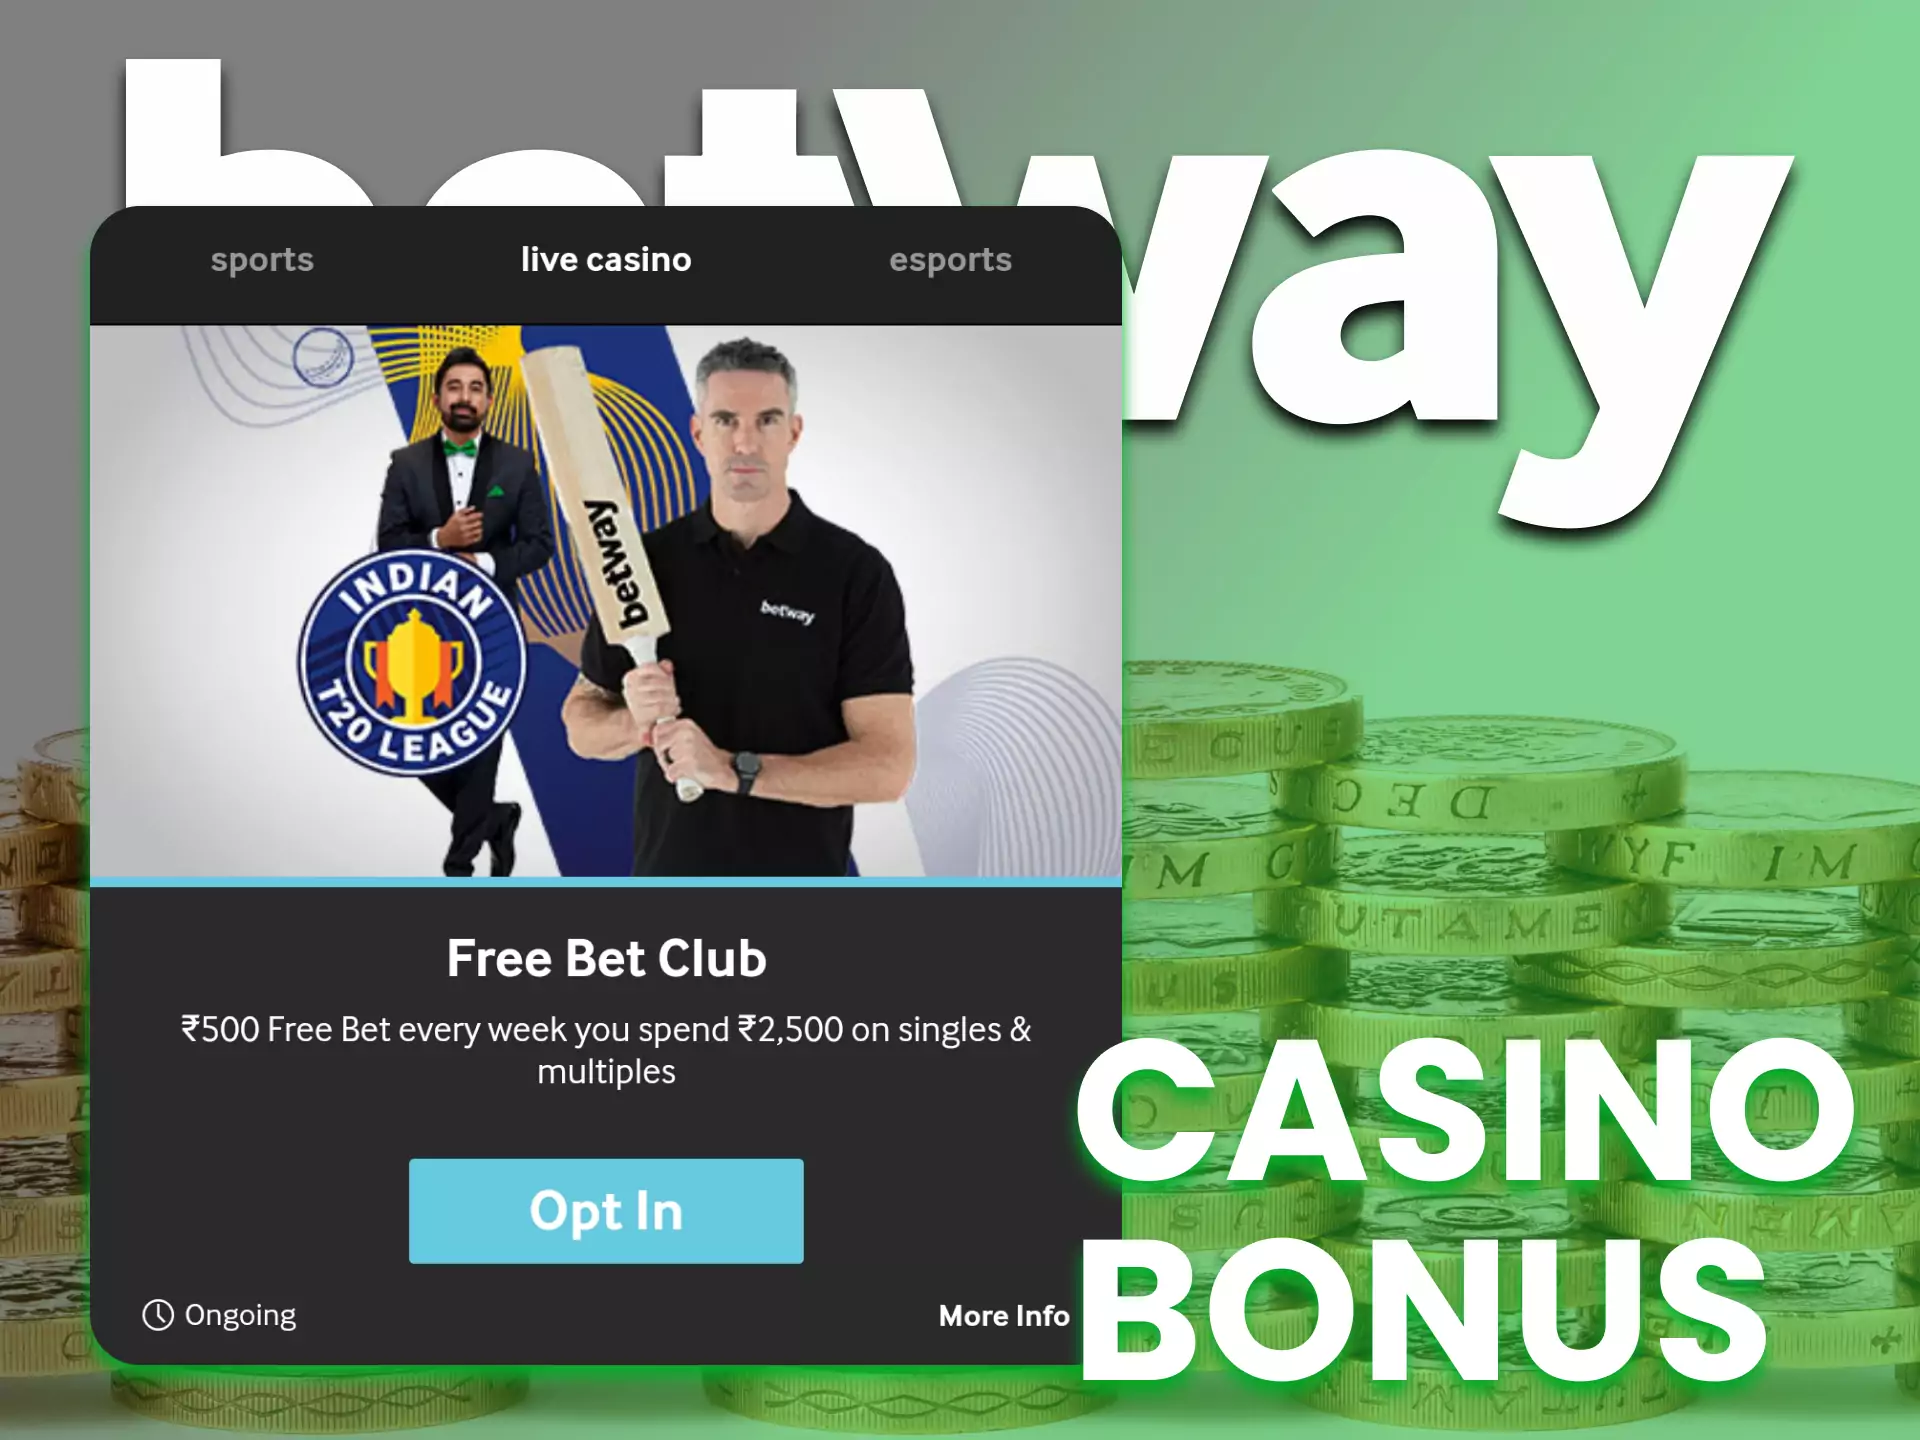 A special casino bonus is available to you in the Betway app.